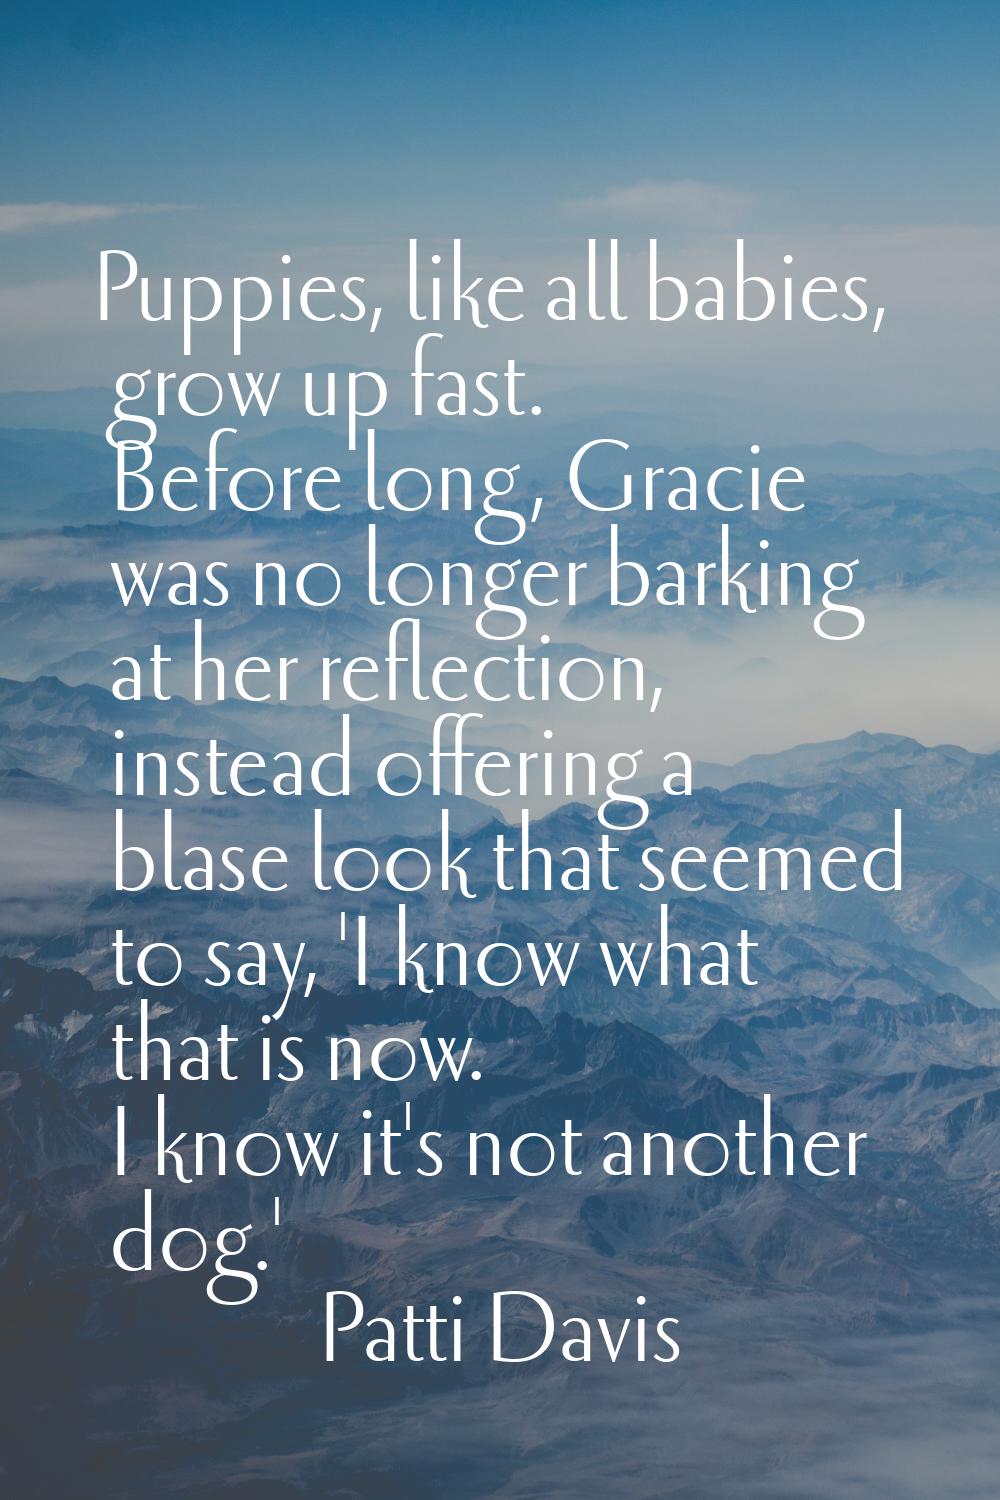 Puppies, like all babies, grow up fast. Before long, Gracie was no longer barking at her reflection